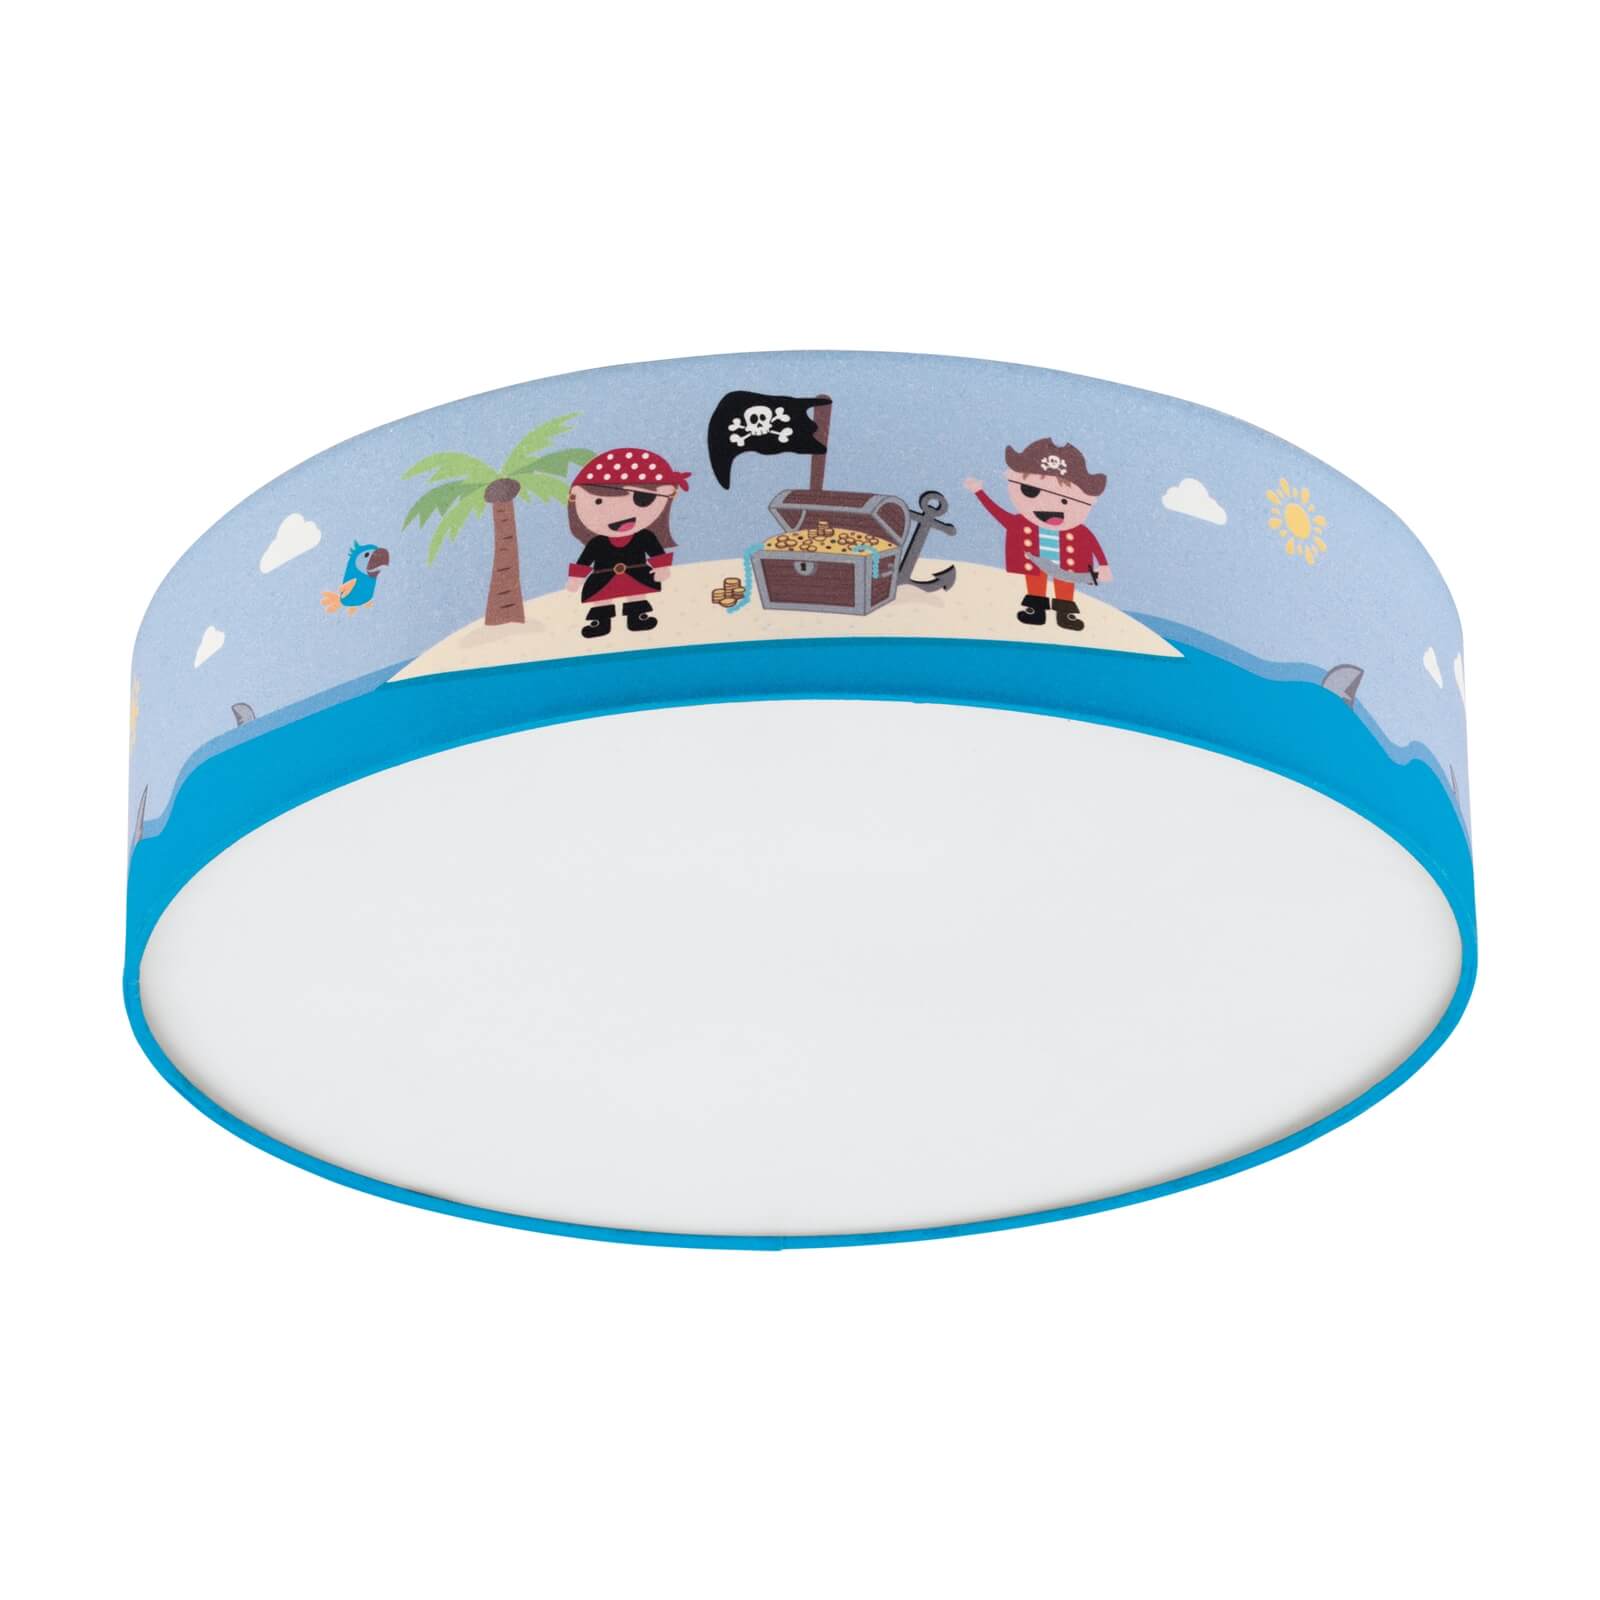 Eglo San Carlo Childrens Ceiling Light with Pirates - Black